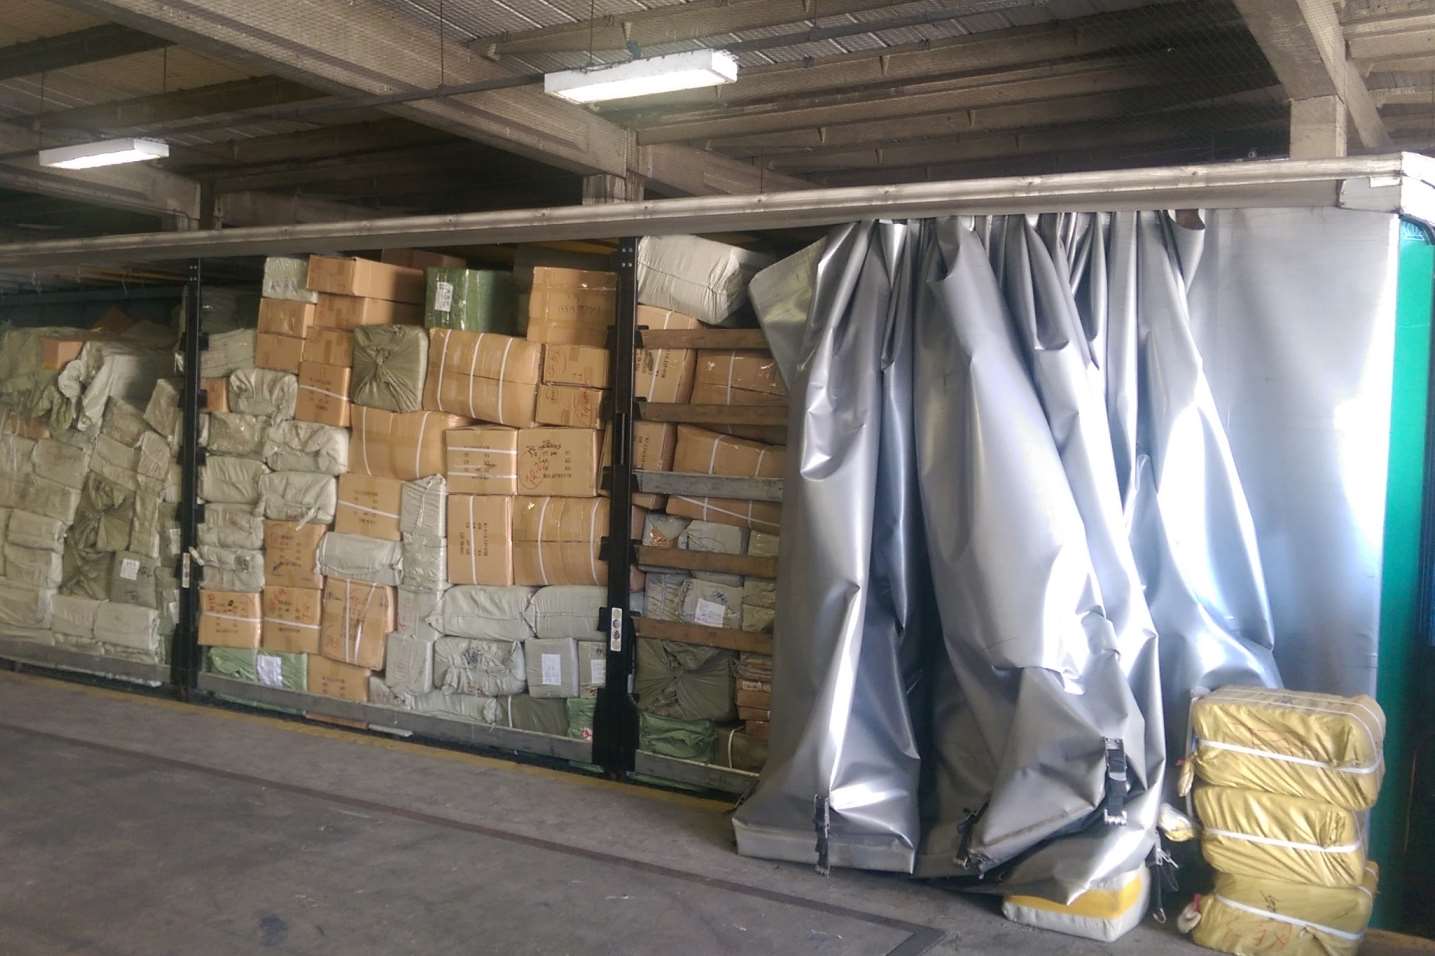 A consignment of goods was seized at Dover